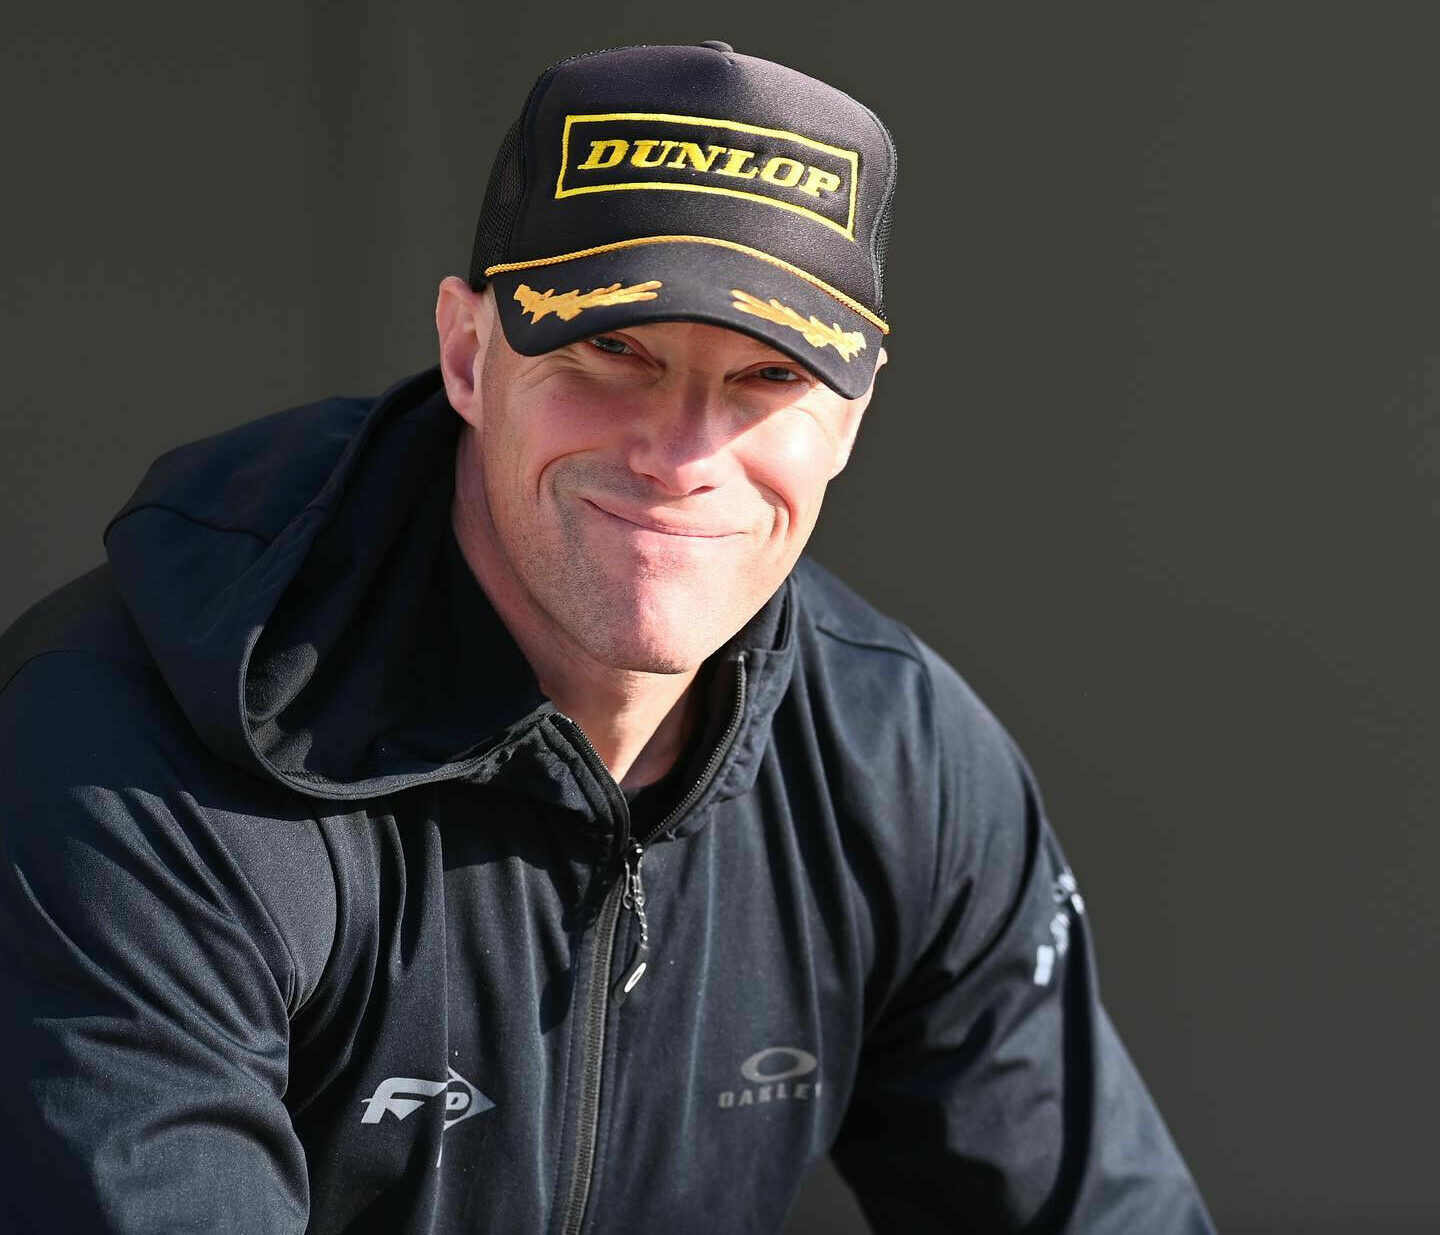 Chad Geer has been promoted to Director of Product Marketing and Motorcycle Motorsports at Dunlop. Photo courtesy Dunlop.